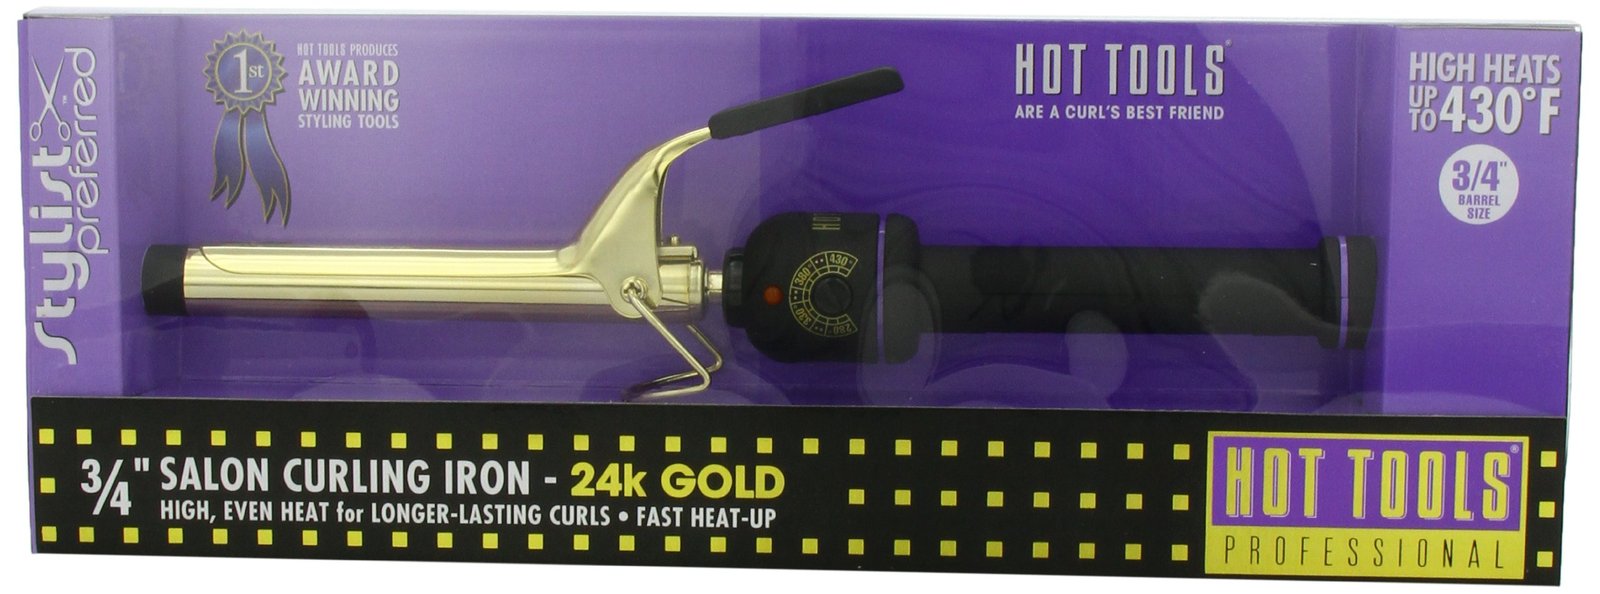 HOT TOOLS ¾" 24K GOLD CURLING IRON / WAND - 1101 - $29.30